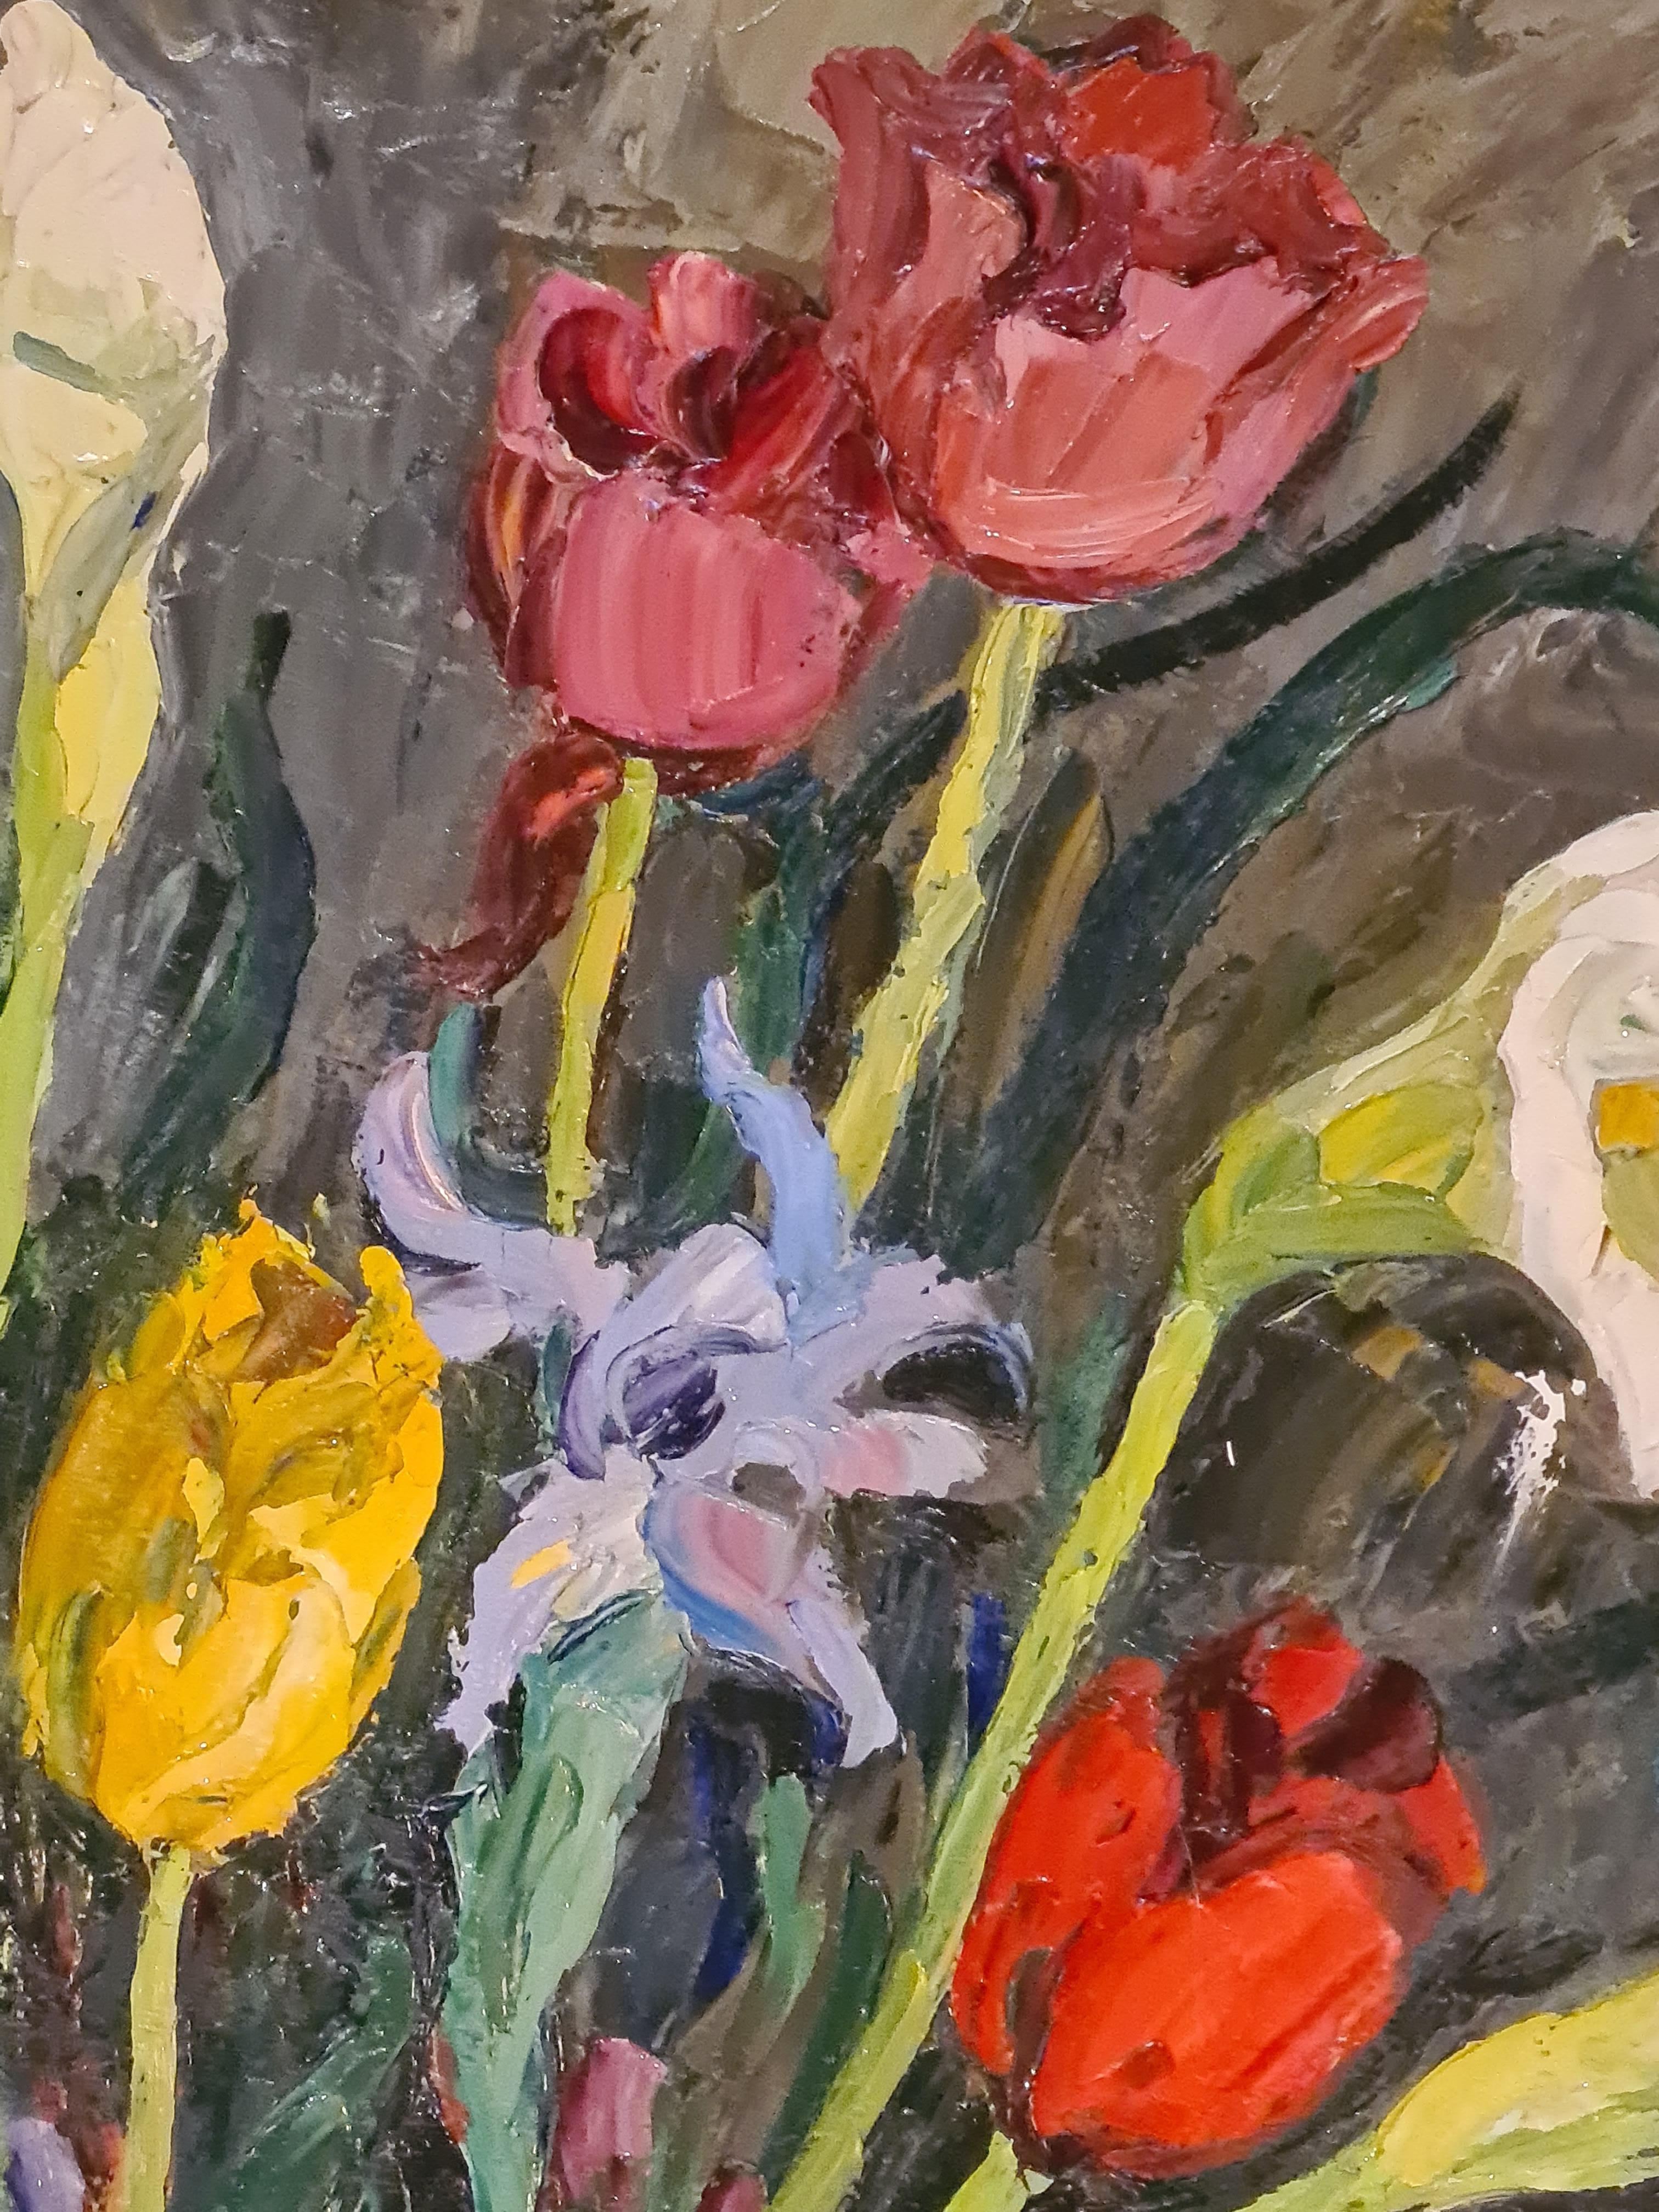 Large Scale French Oil on Canvas Still Life of Flowers, Tulips, Iris and Lillies - Post-Modern Painting by André VAGH WEINMANN